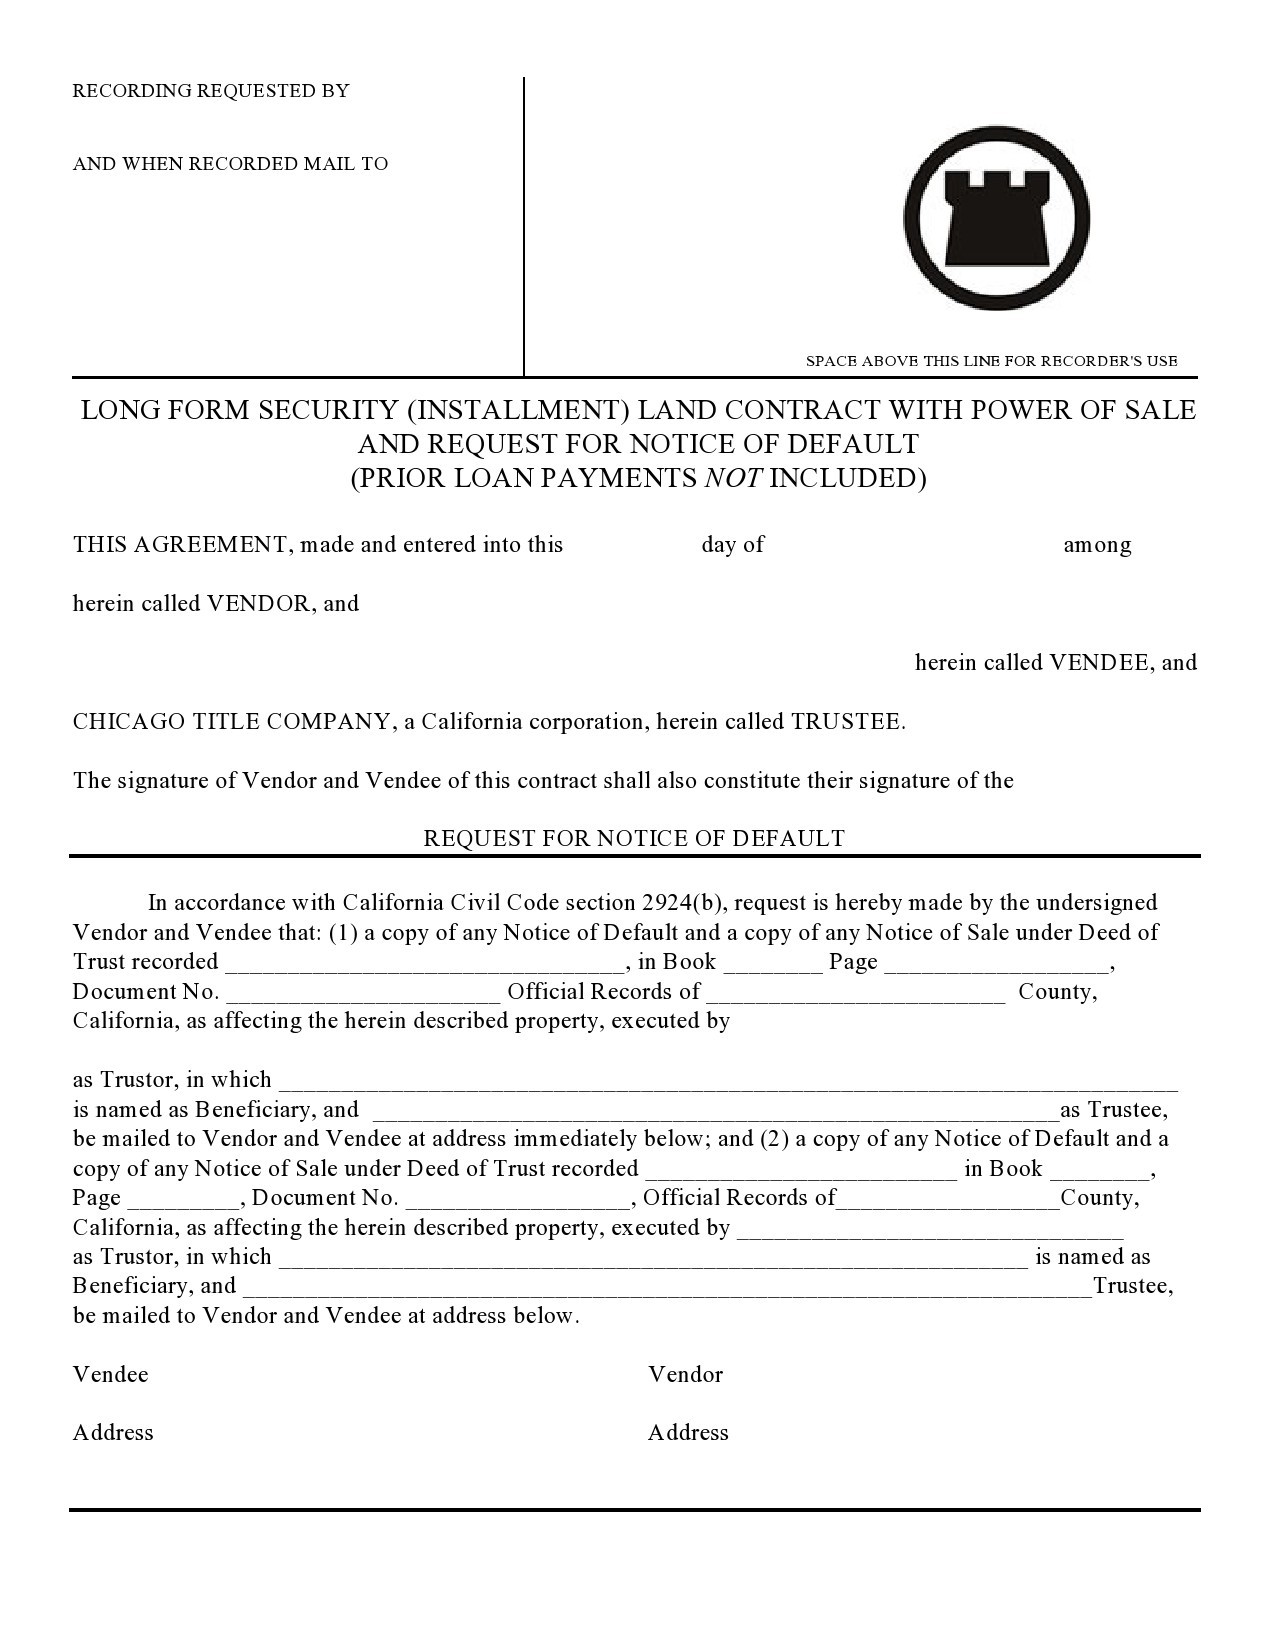 Free land contract form 14